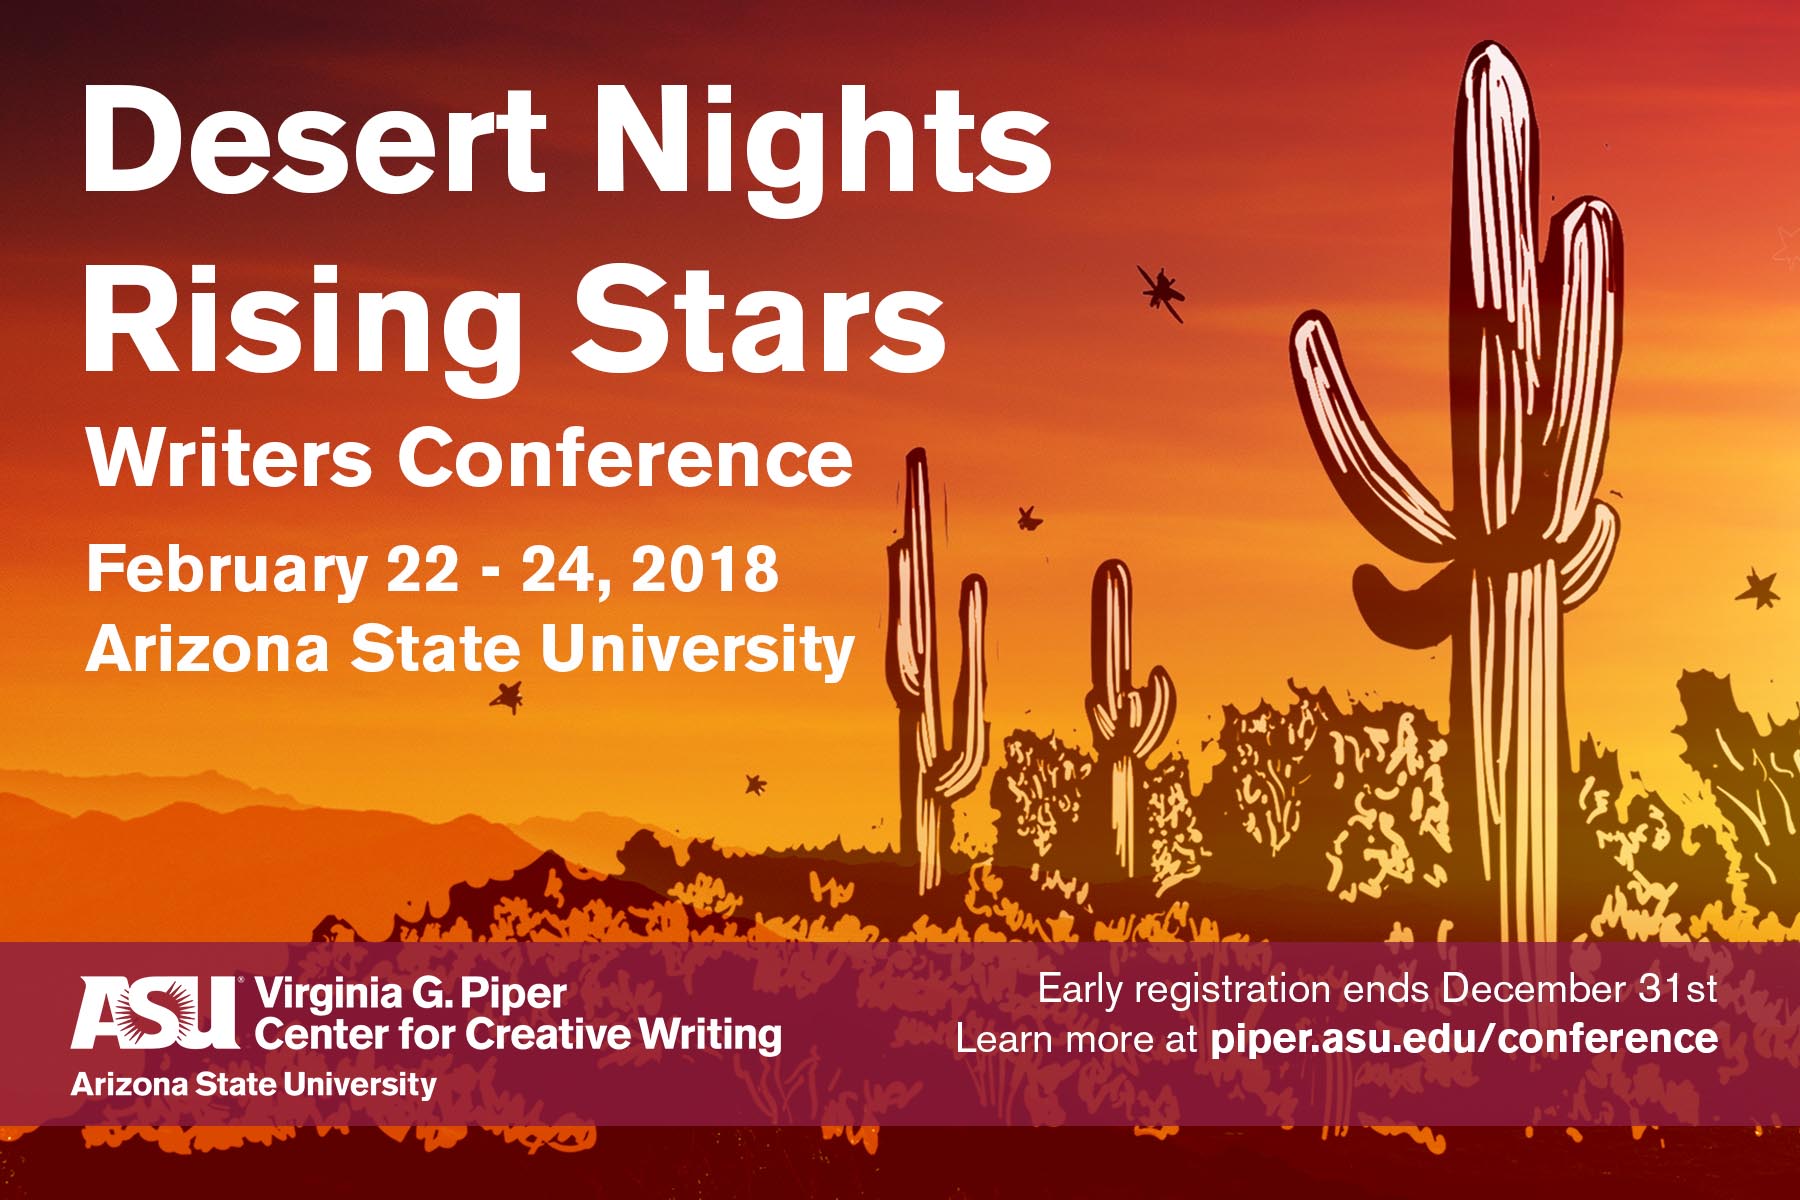 Flier for the 2018 Desert Nights Rising Stars Writers Conference